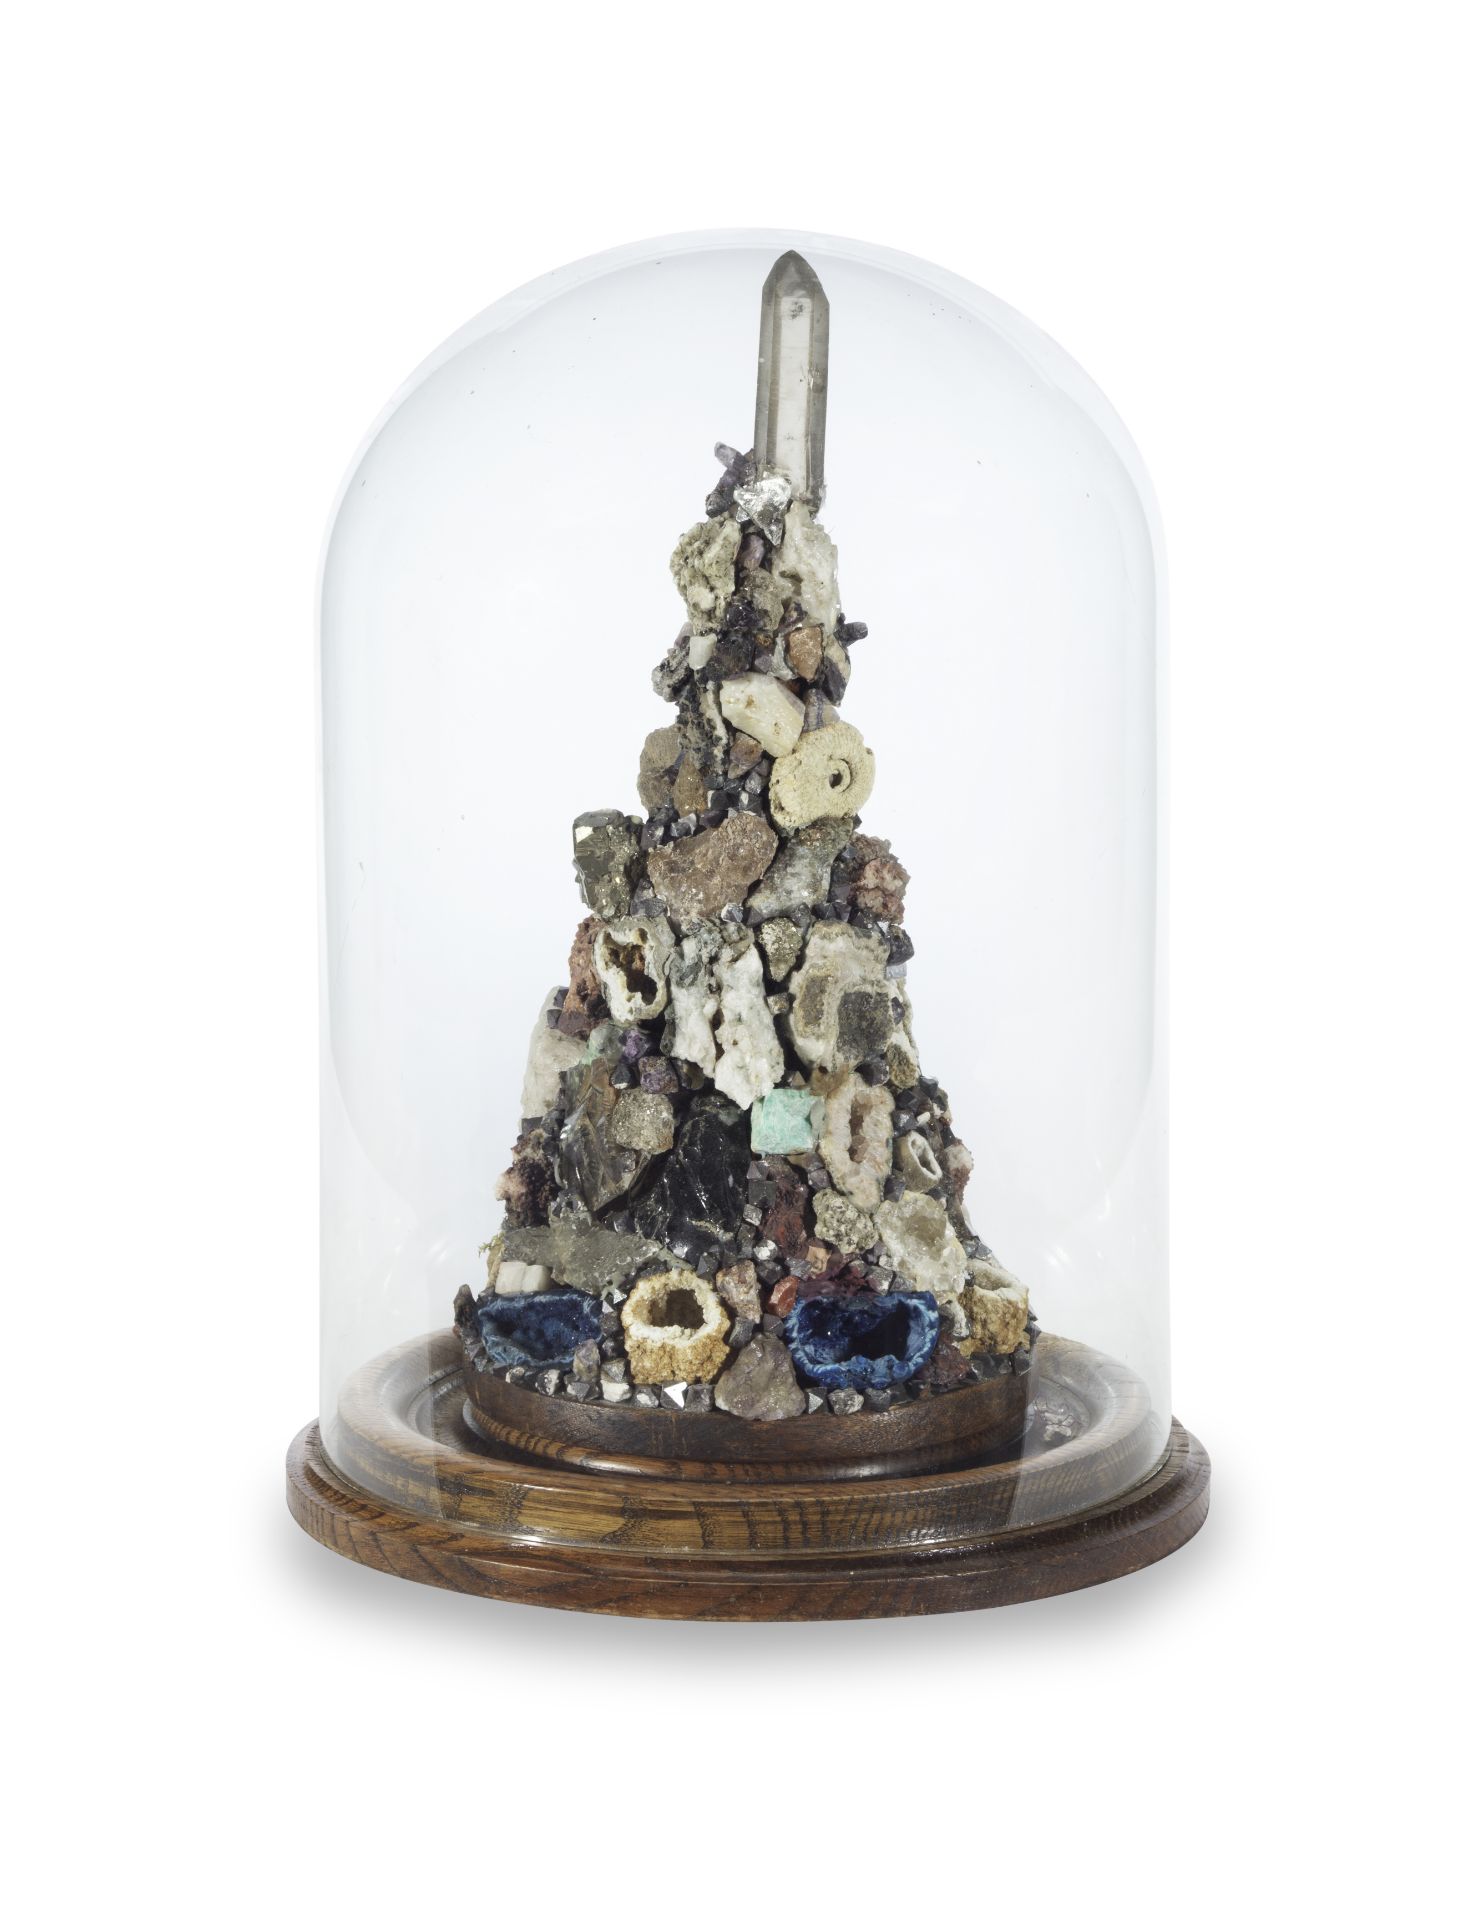 A 19th century mineral specimen display with glass dome